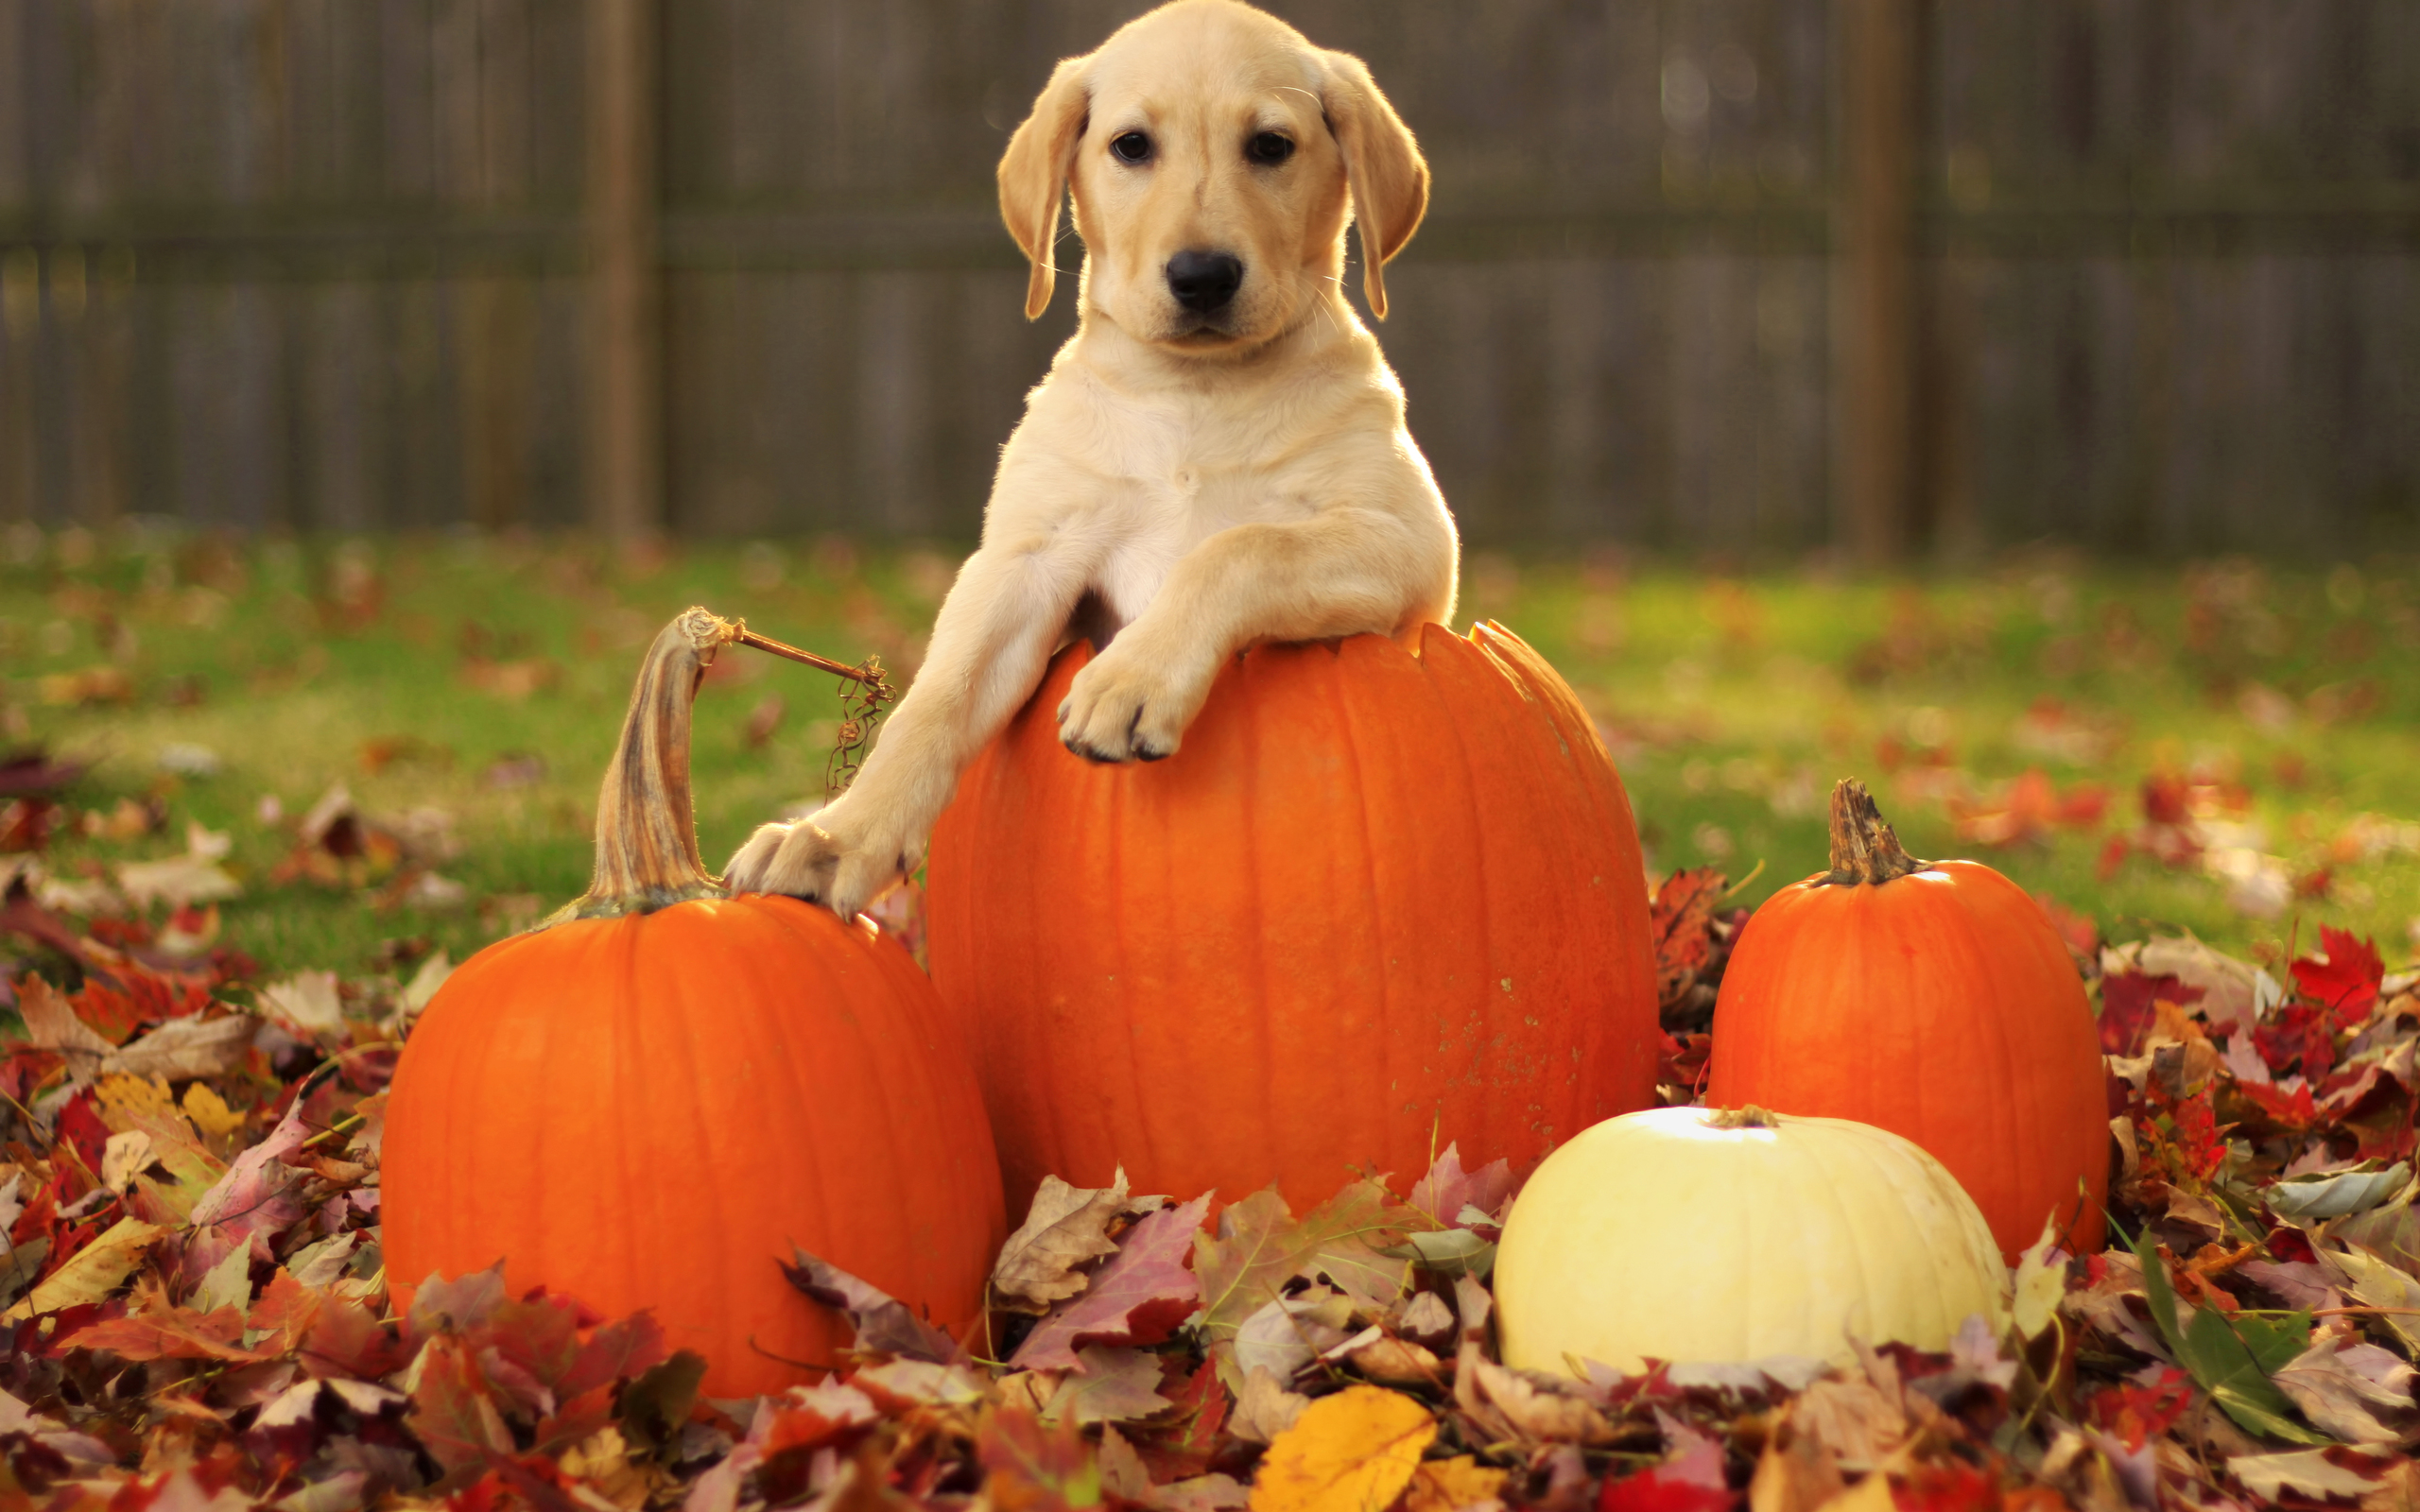 Autumn Free Wallpaper   A pumpkin and adog is a great wallpaper for